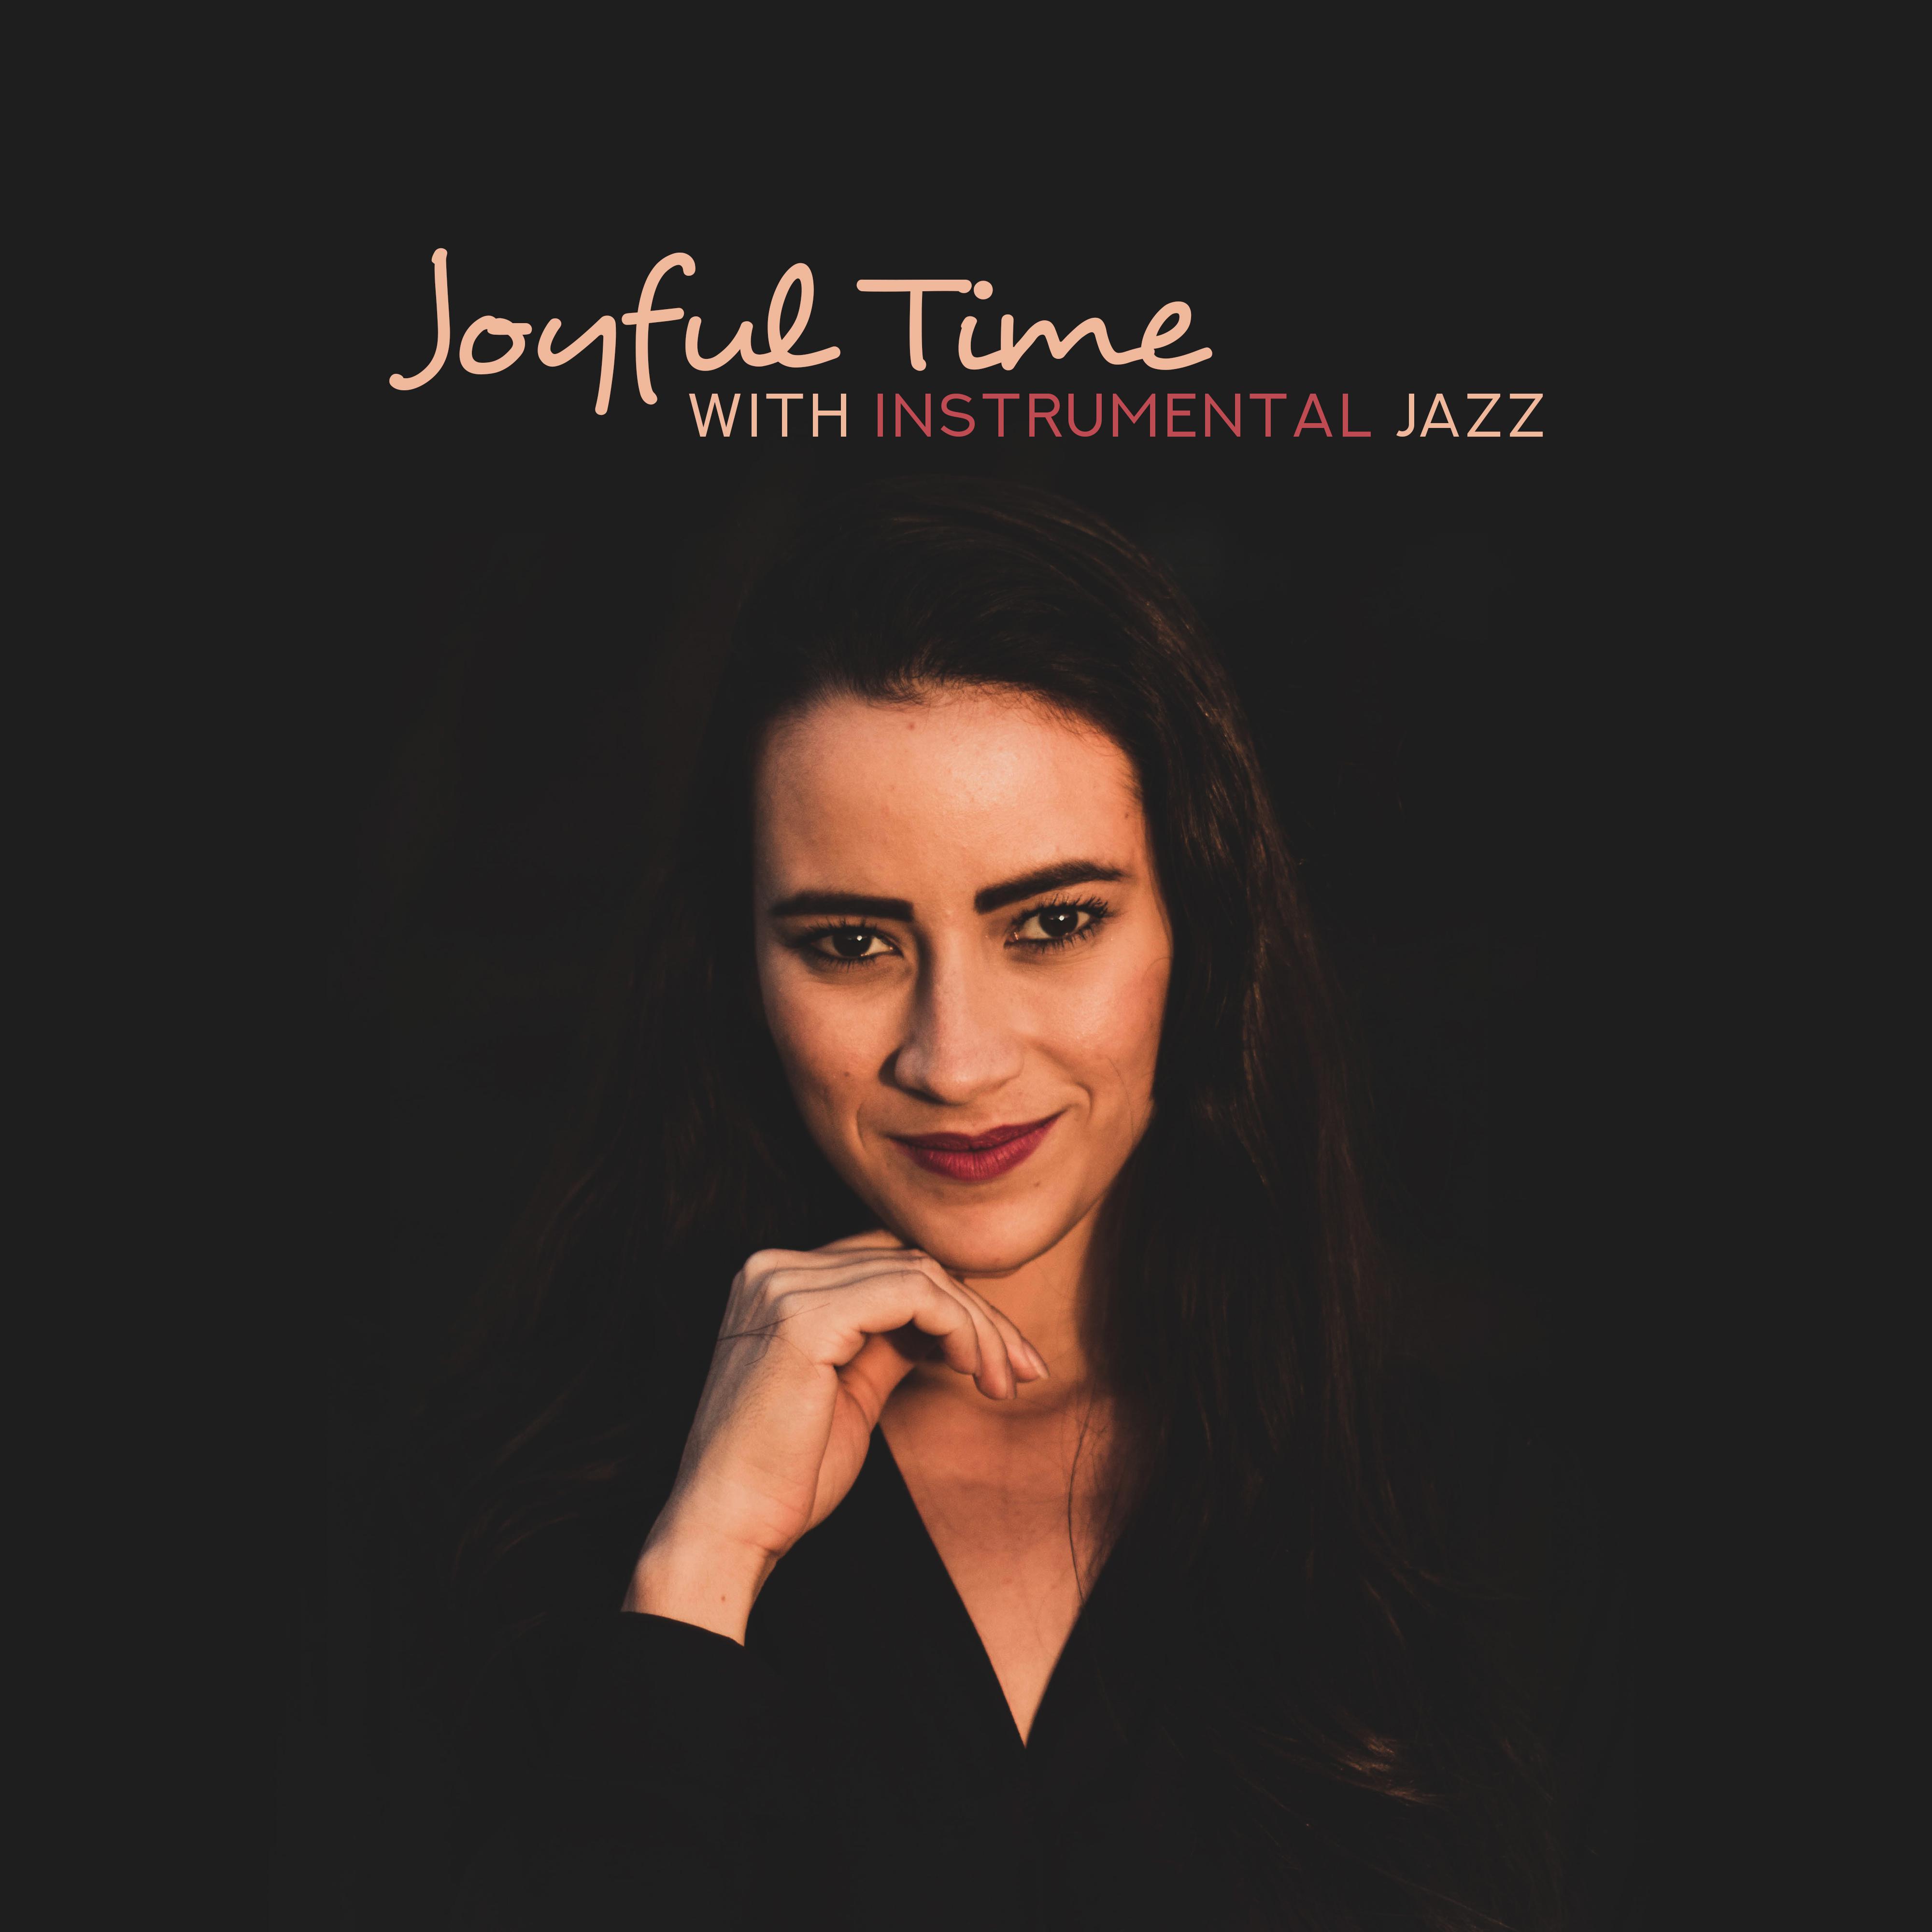 Joyful Time with Instrumental Jazz: 15 Vintage Jazz Perfect Background Melodies for Friends Meeting